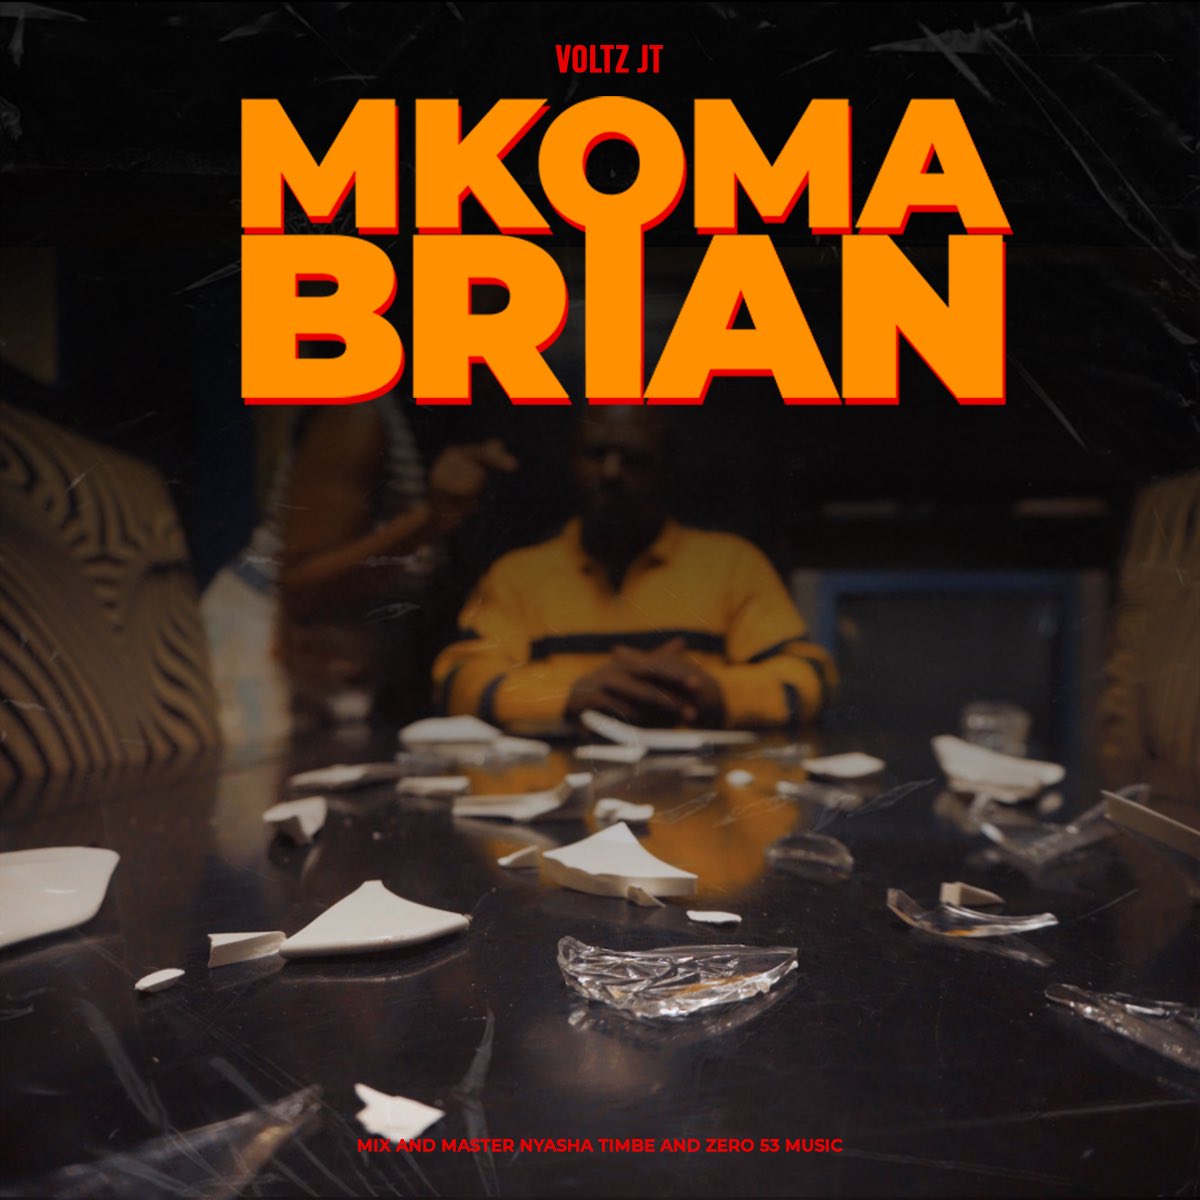 Mkoma Brian drops tomorrow at 10am✌️ Narrated by Voltz JT, Filmed by Blu Mordecai 02/02/24